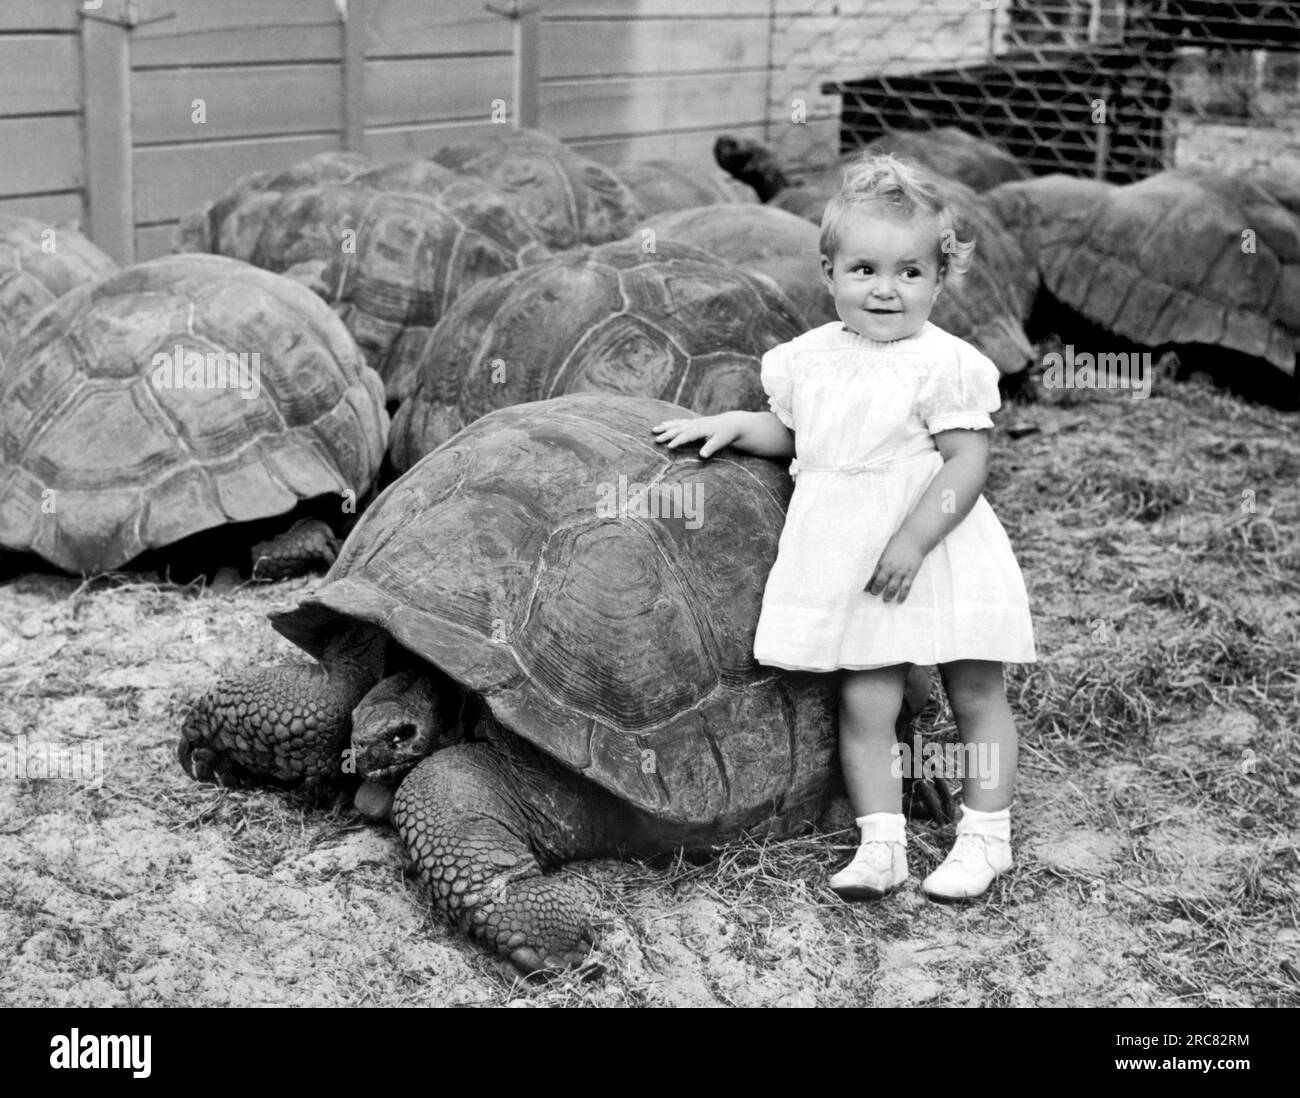 Miami, Florida:  1946. A young girl leans up against nearly five hundred pounds of  tortoise in the world's largest tortoise colony at the North Miami Zoo. Stock Photo